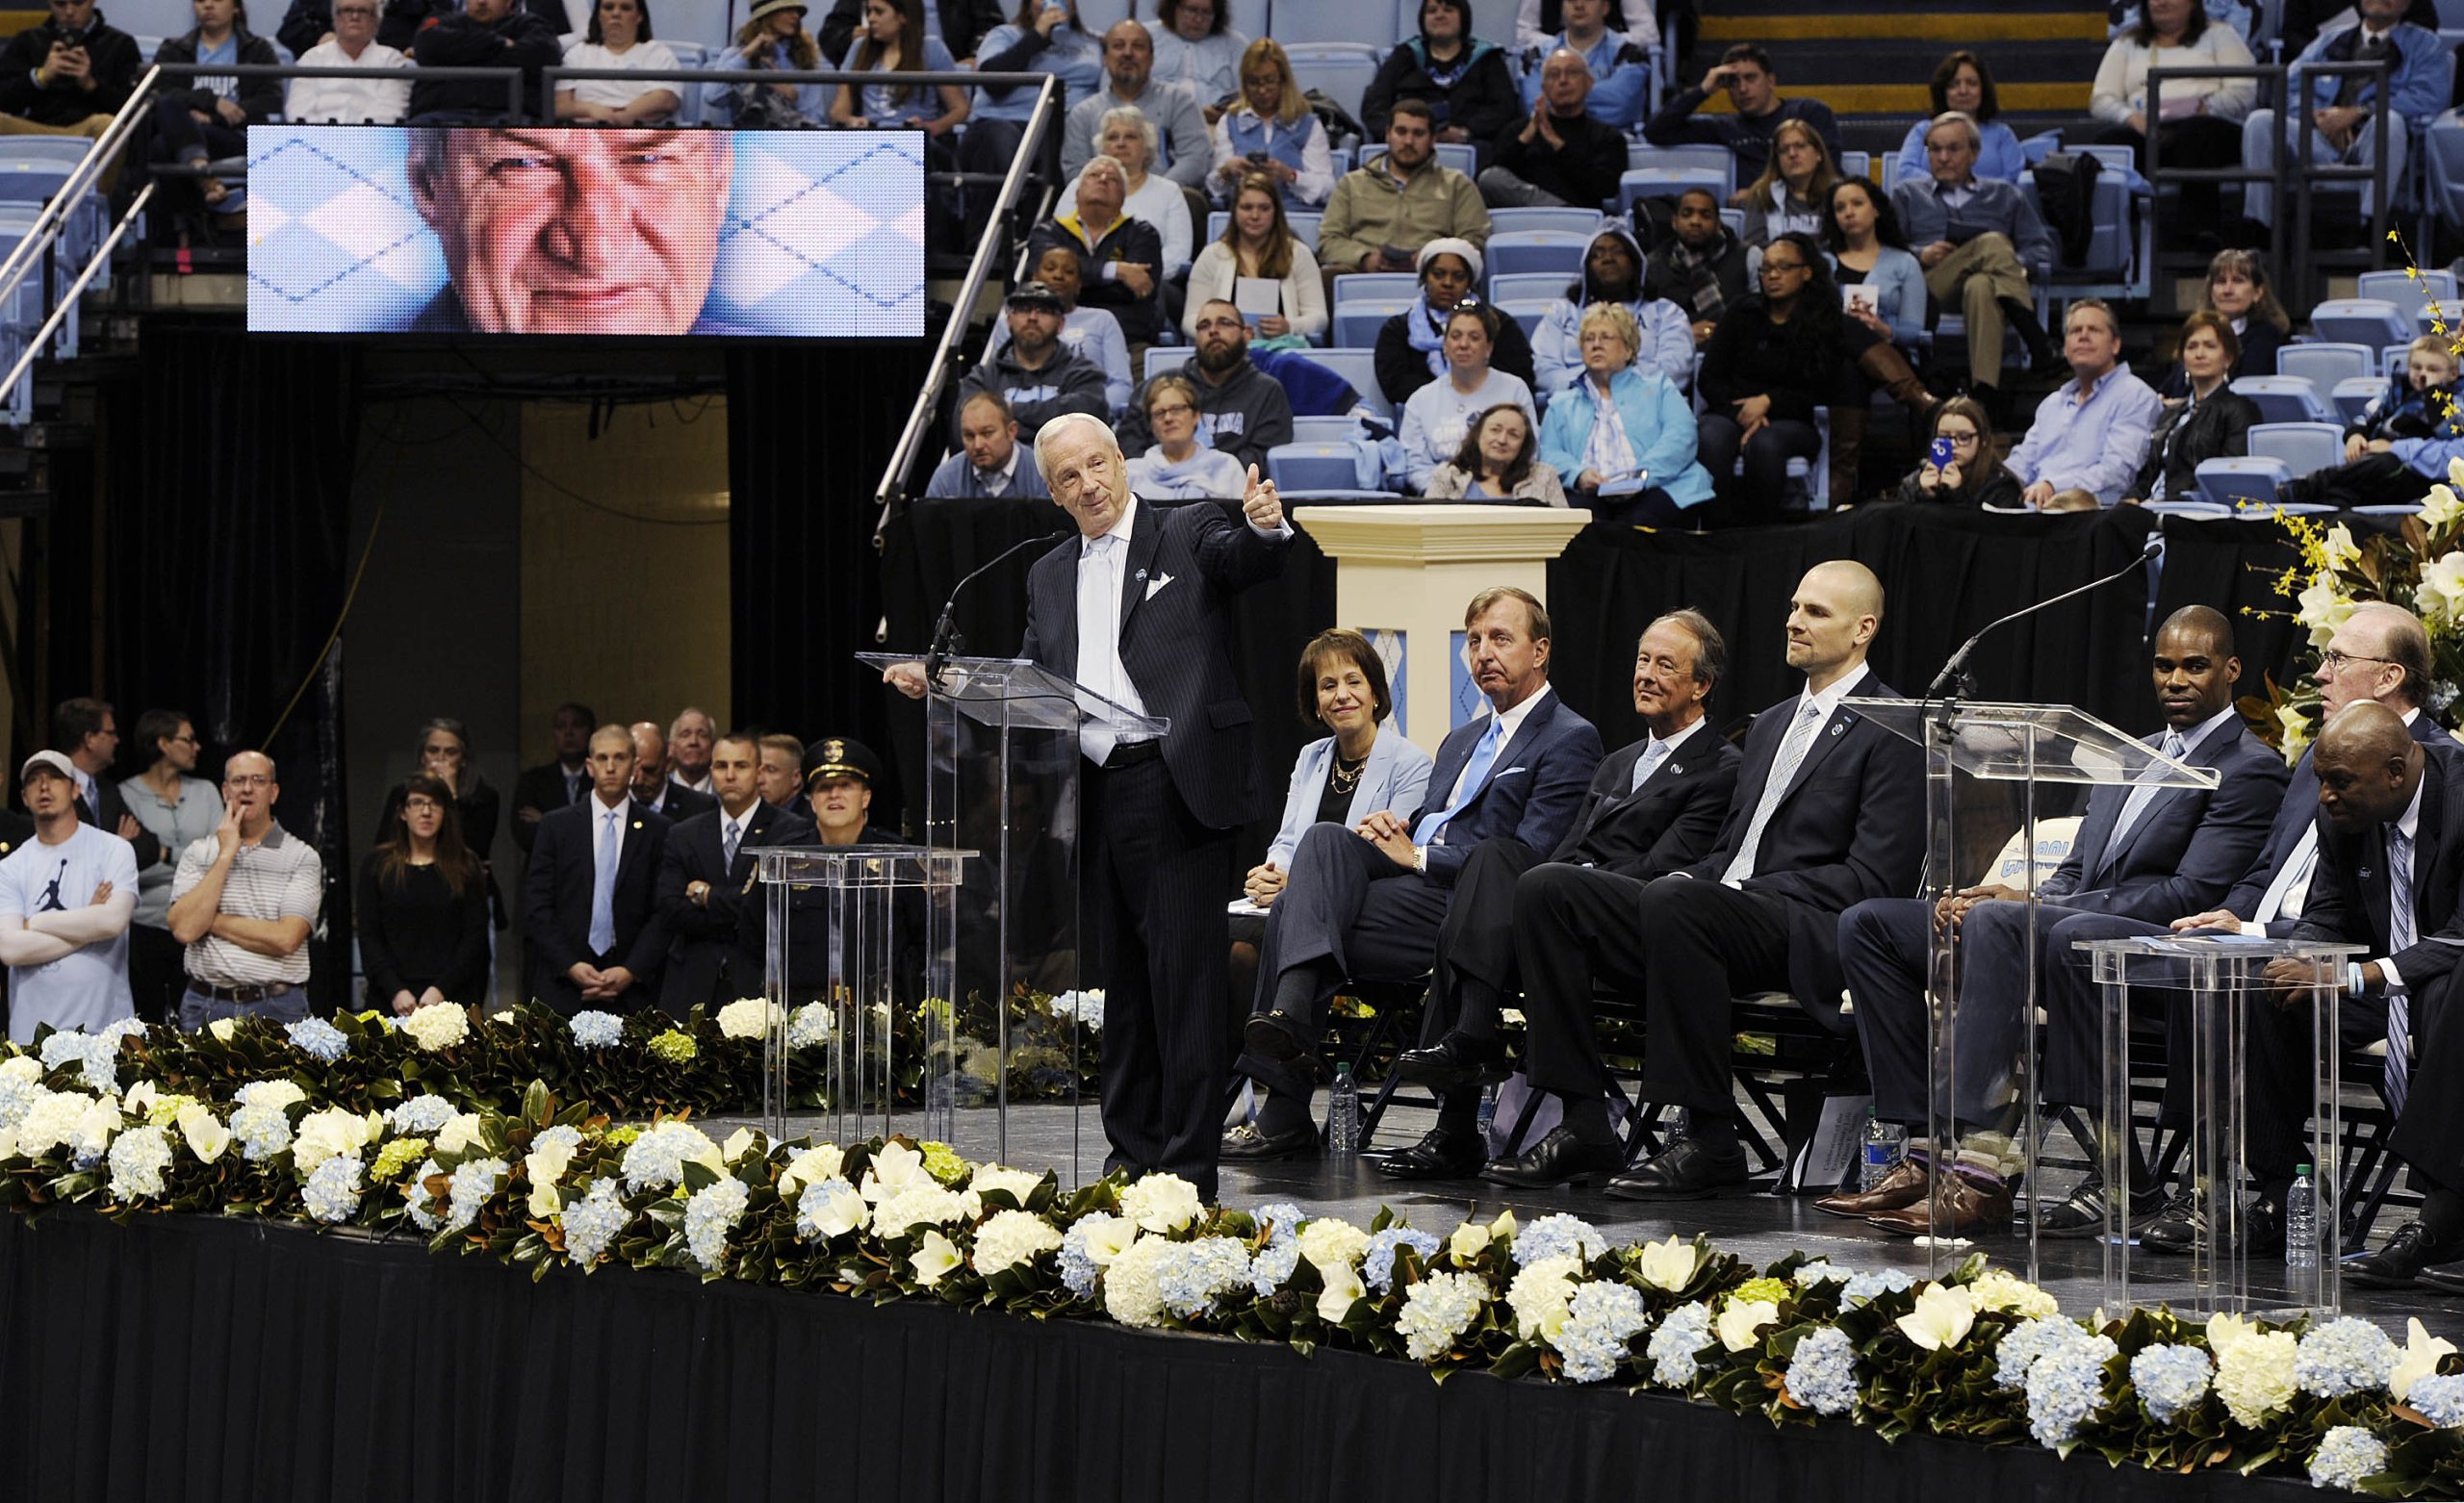 Roy Williams addressing a large crowd.